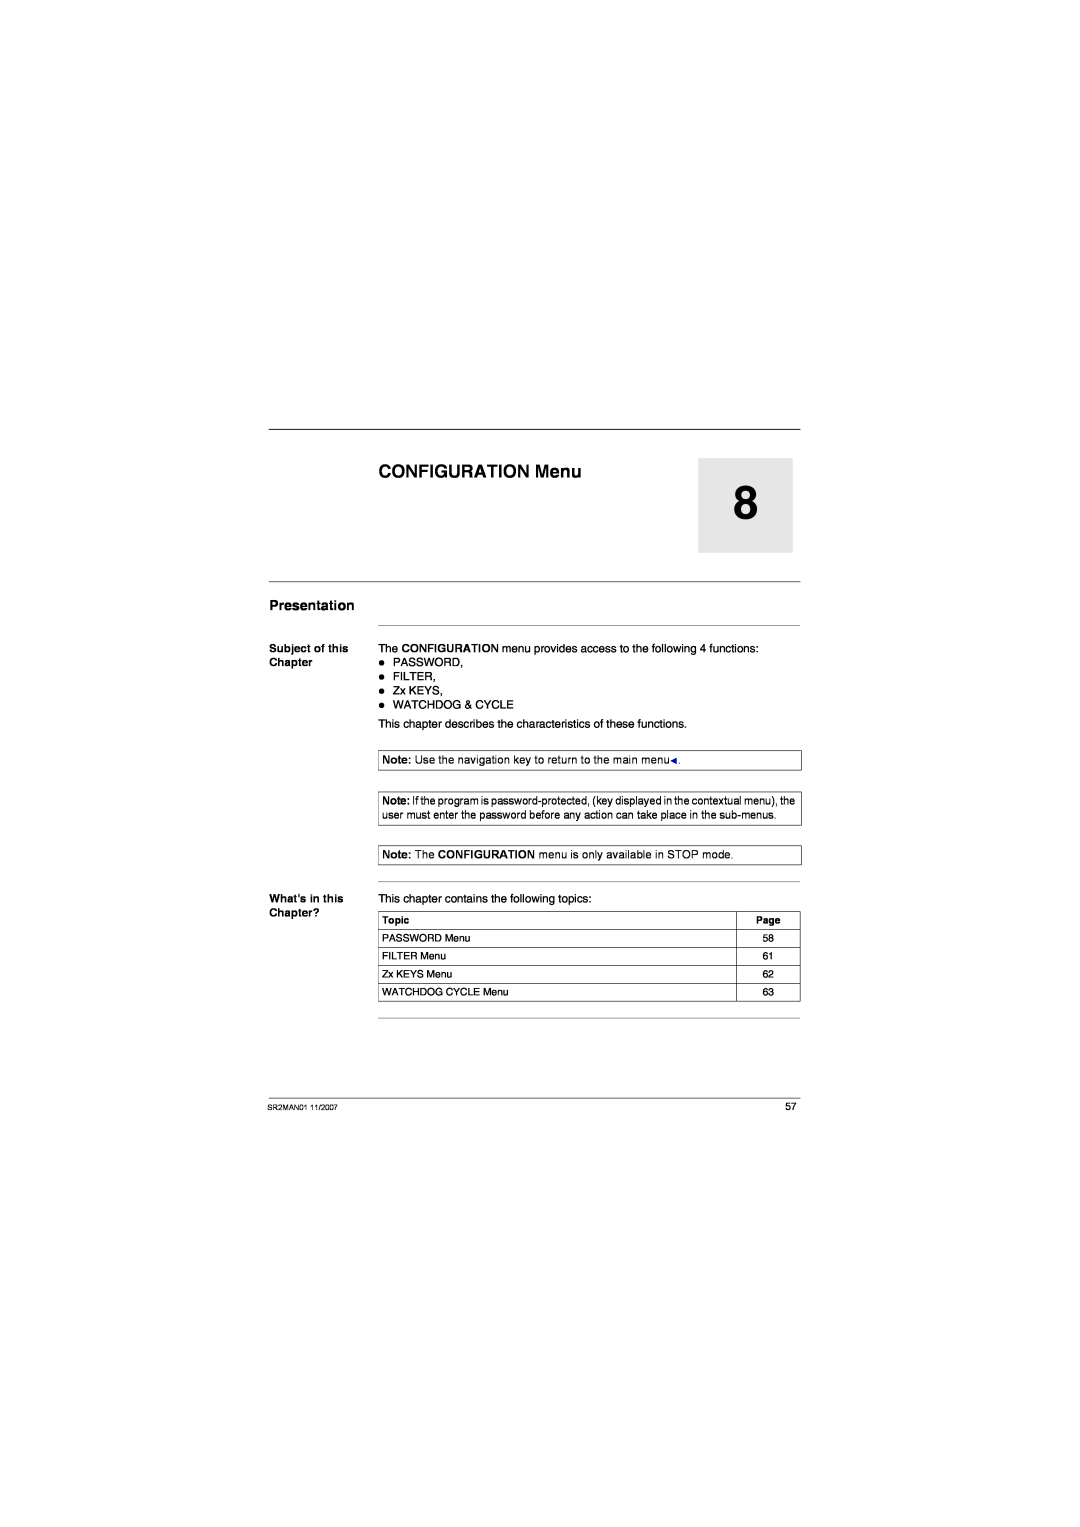 Schneider Electric SR2MAN01 user manual CONFIGURATION Menu, Presentation, Subject of this Chapter Whats in this Chapter? 